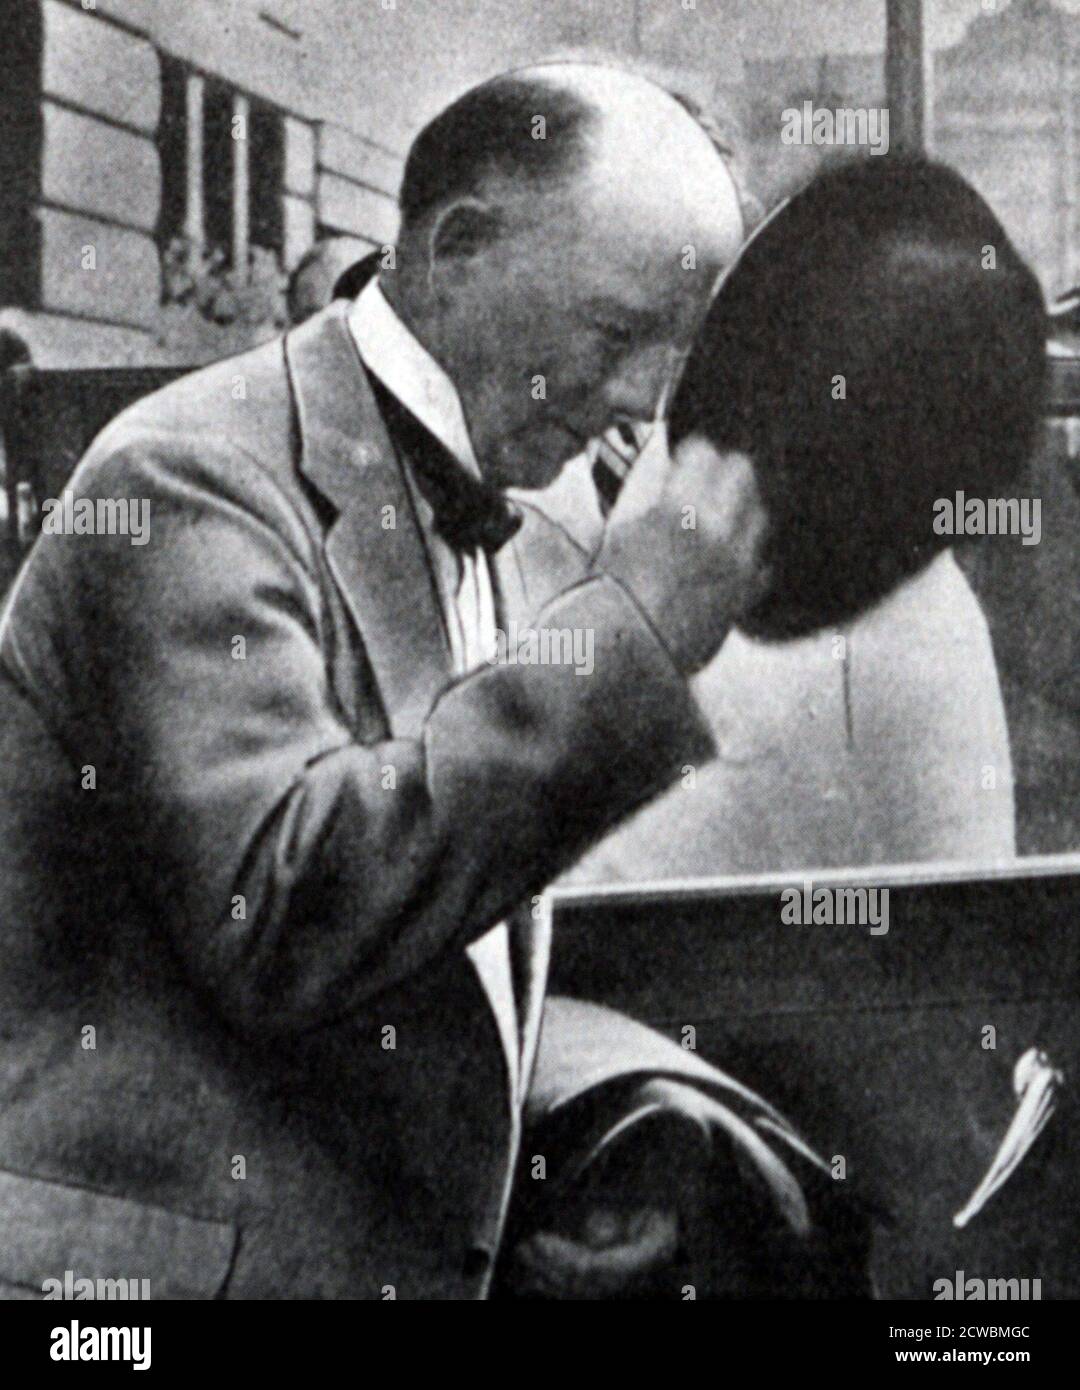 Black and white photograph of Lord Walter Runciman (1870-1949), Liberal Party politician, visiting Prague on 2 and 3 August 1938. Stock Photo